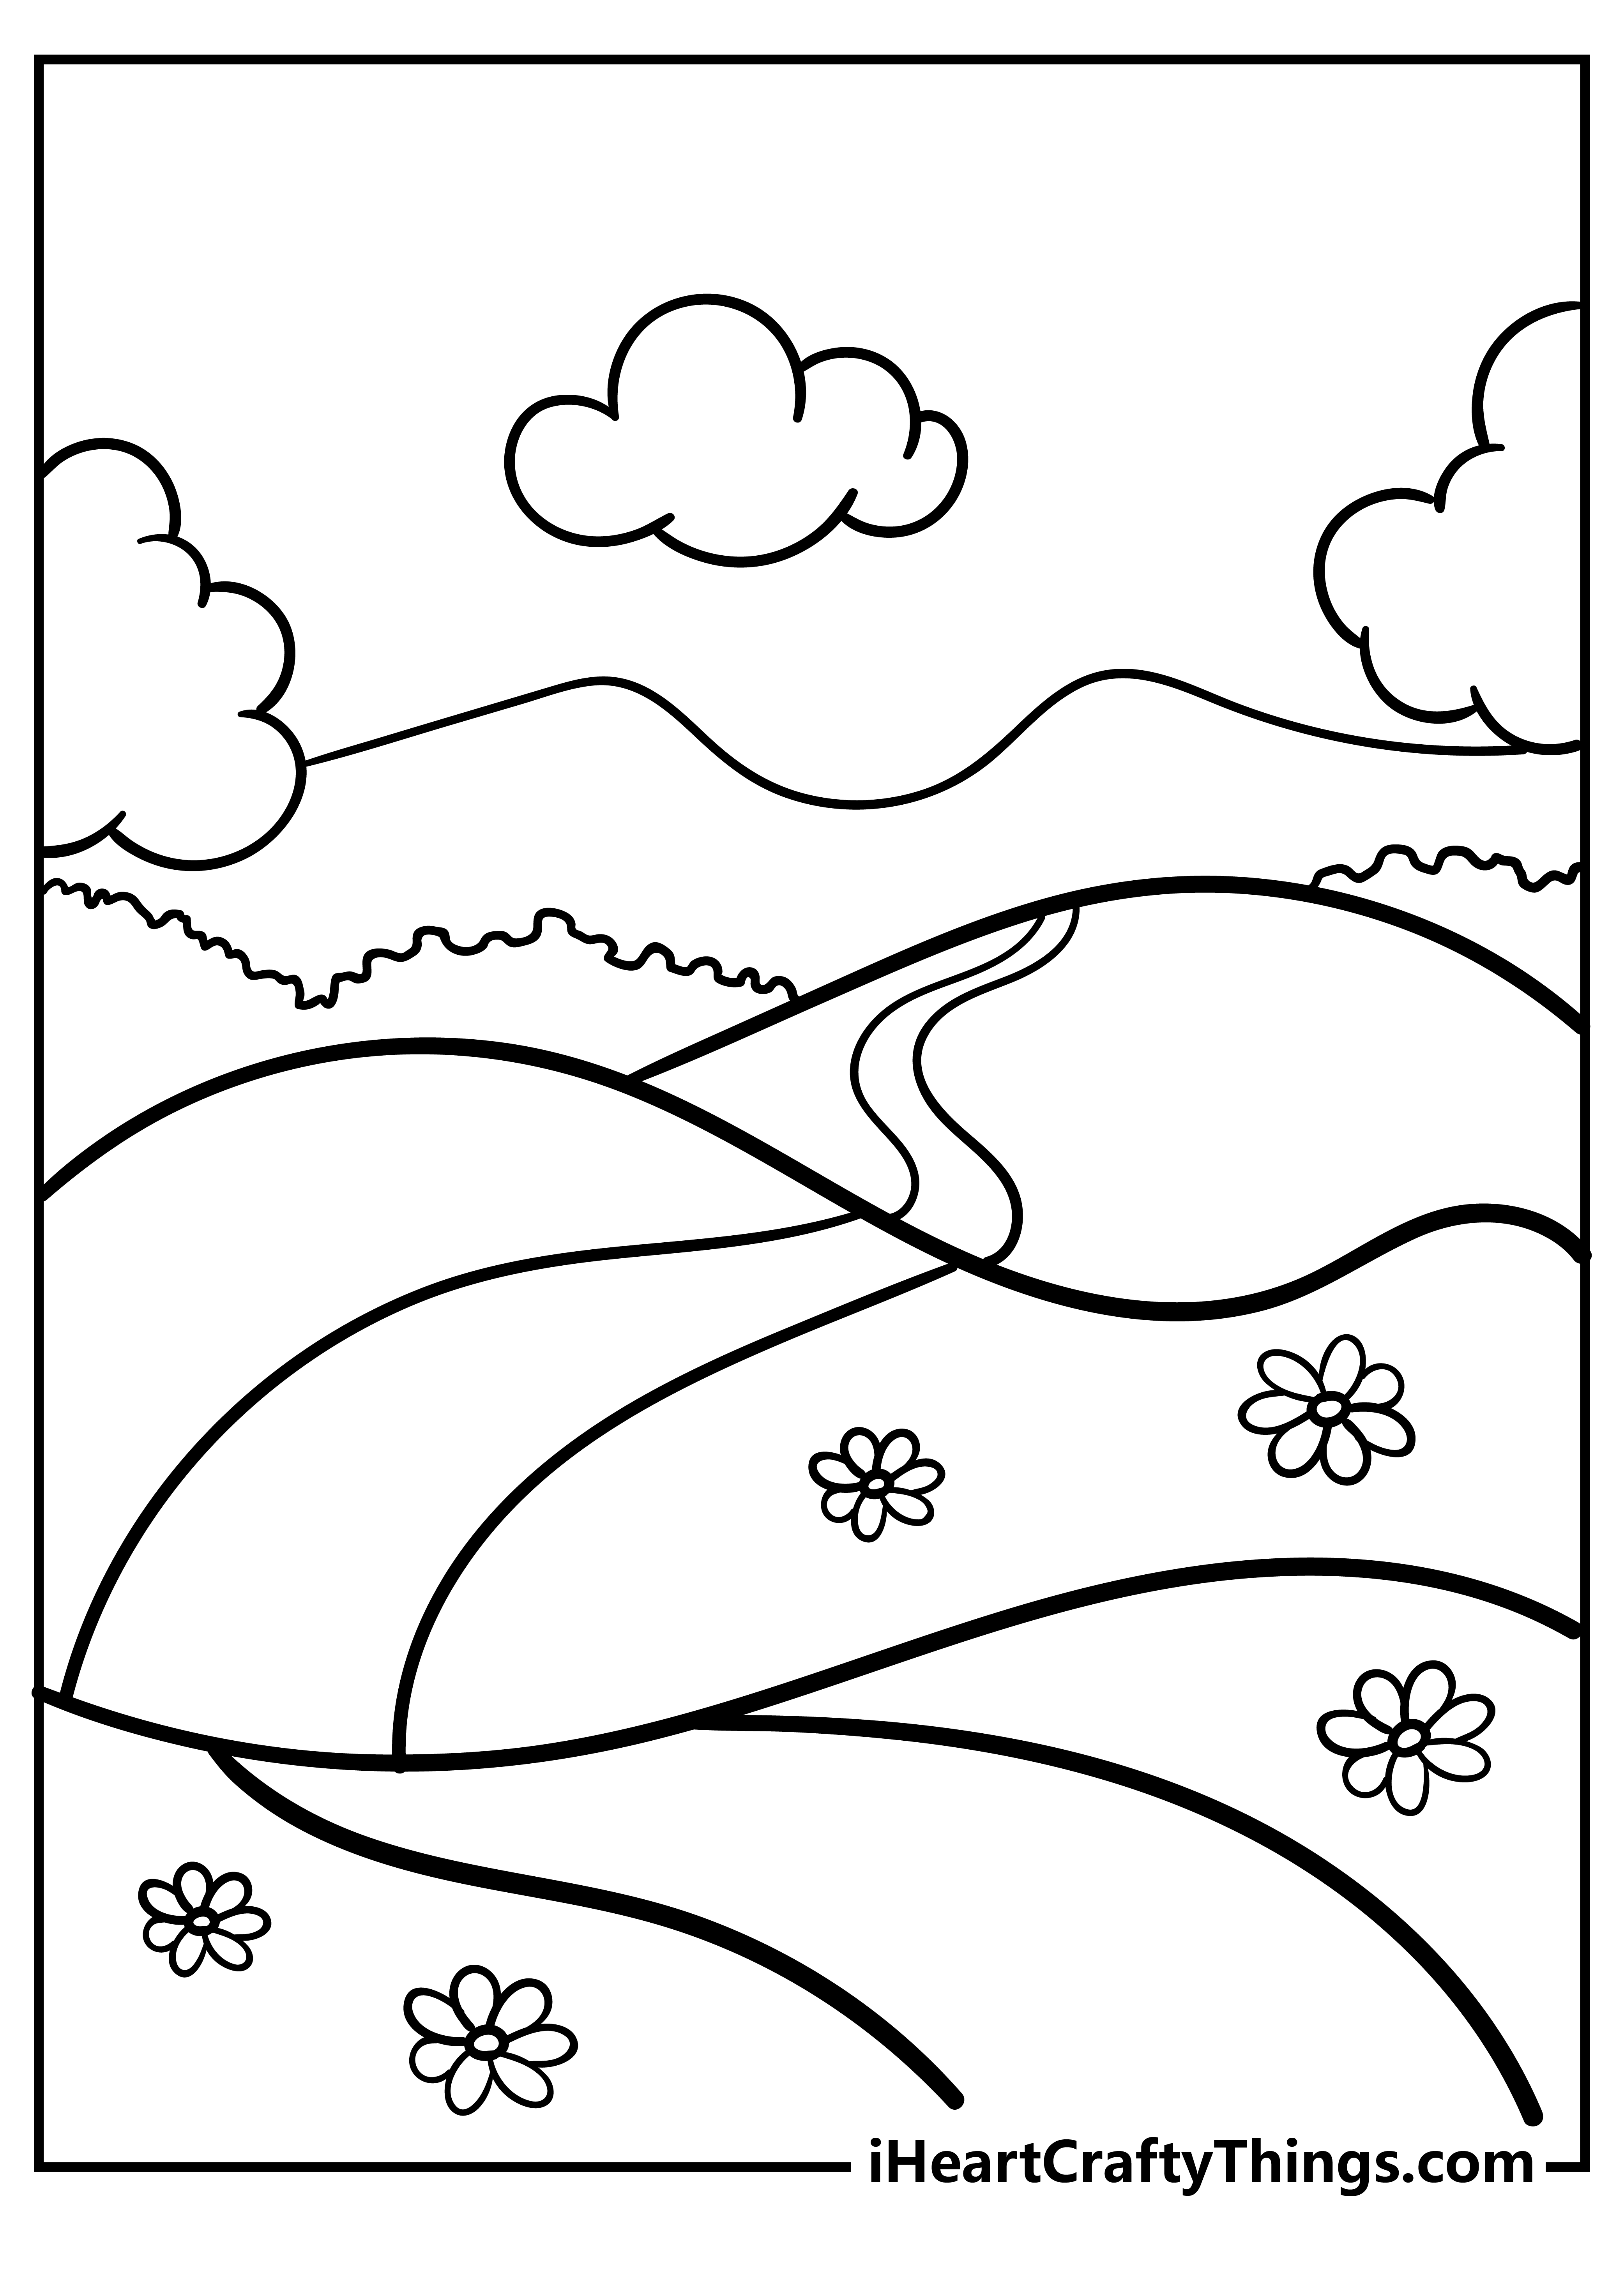 Nature Coloring Pages for kids free download